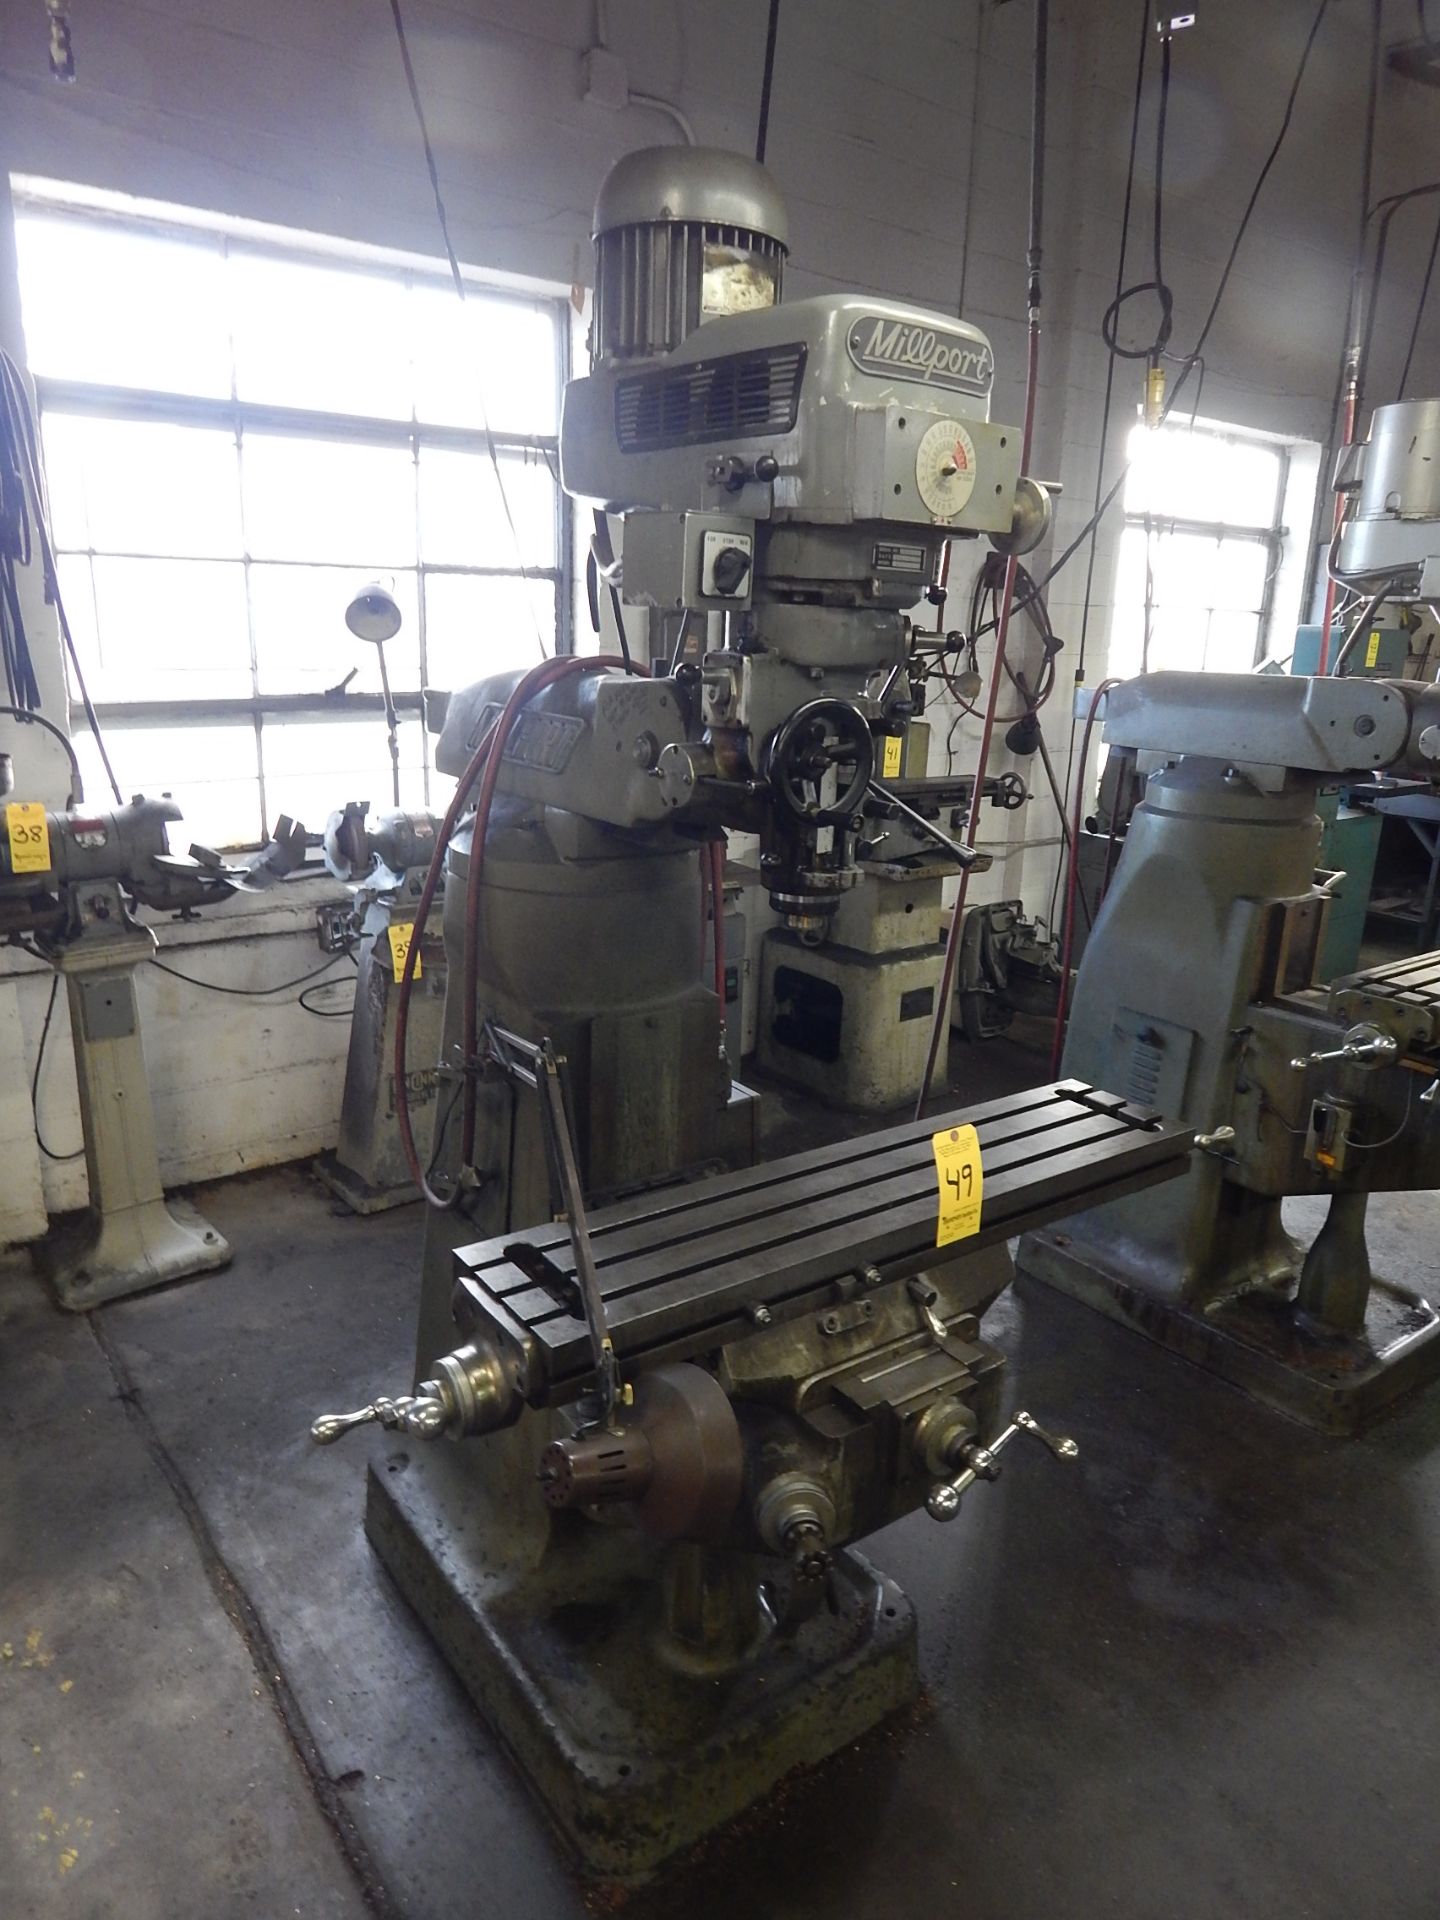 Millport Model 3VH, 2 HP Variable Speed Vertical Mill, 9" X 42" Table, s/n 85158, - Image 4 of 4